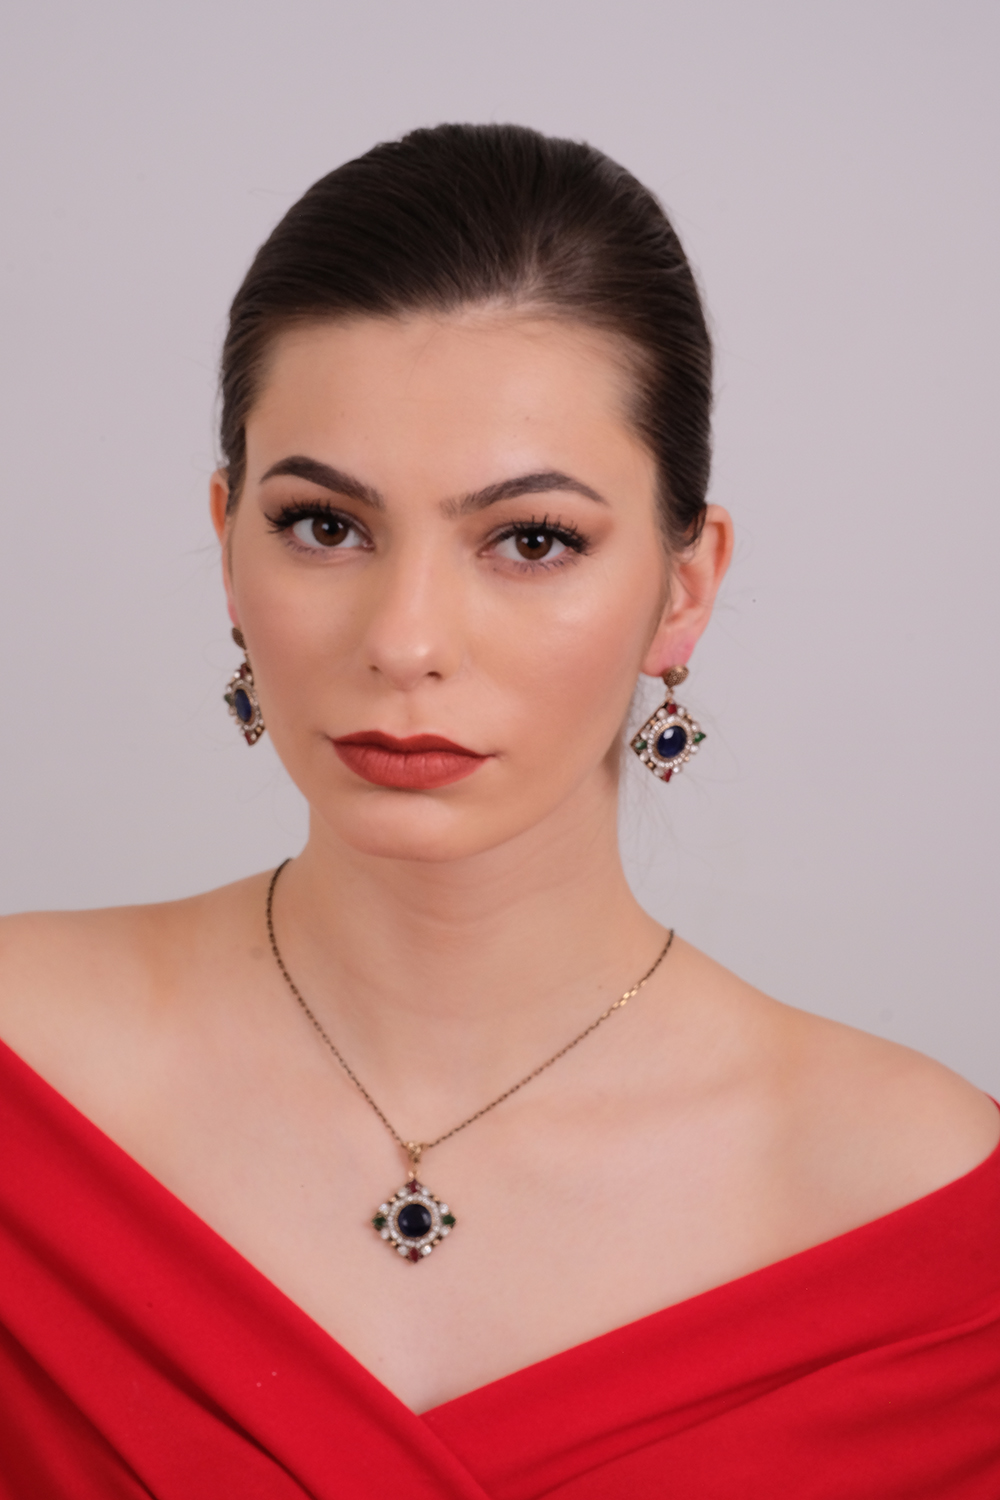 KYRIAKE Necklace and Earrings Jewelry Set